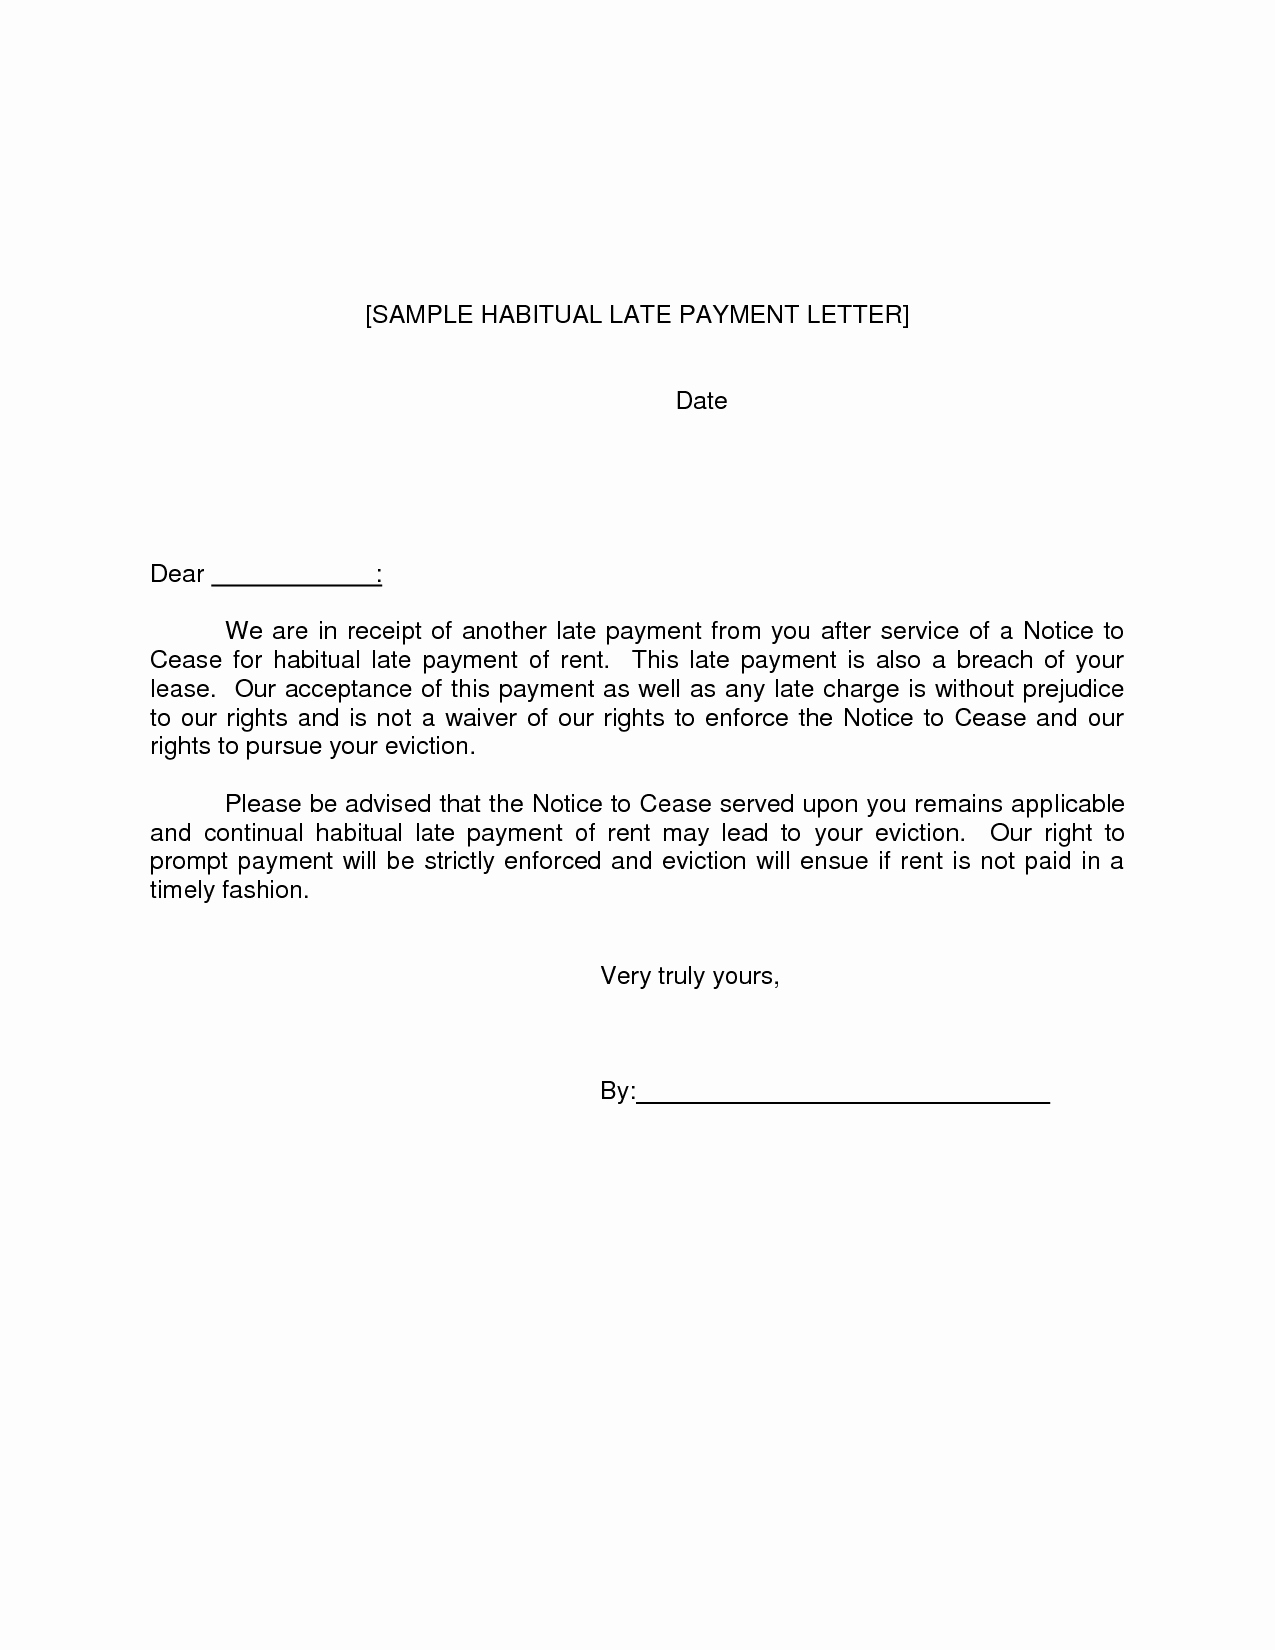 Sample Letter Of Late Payment Explanation Lovely Sample Letter Requesting Overdue Payment